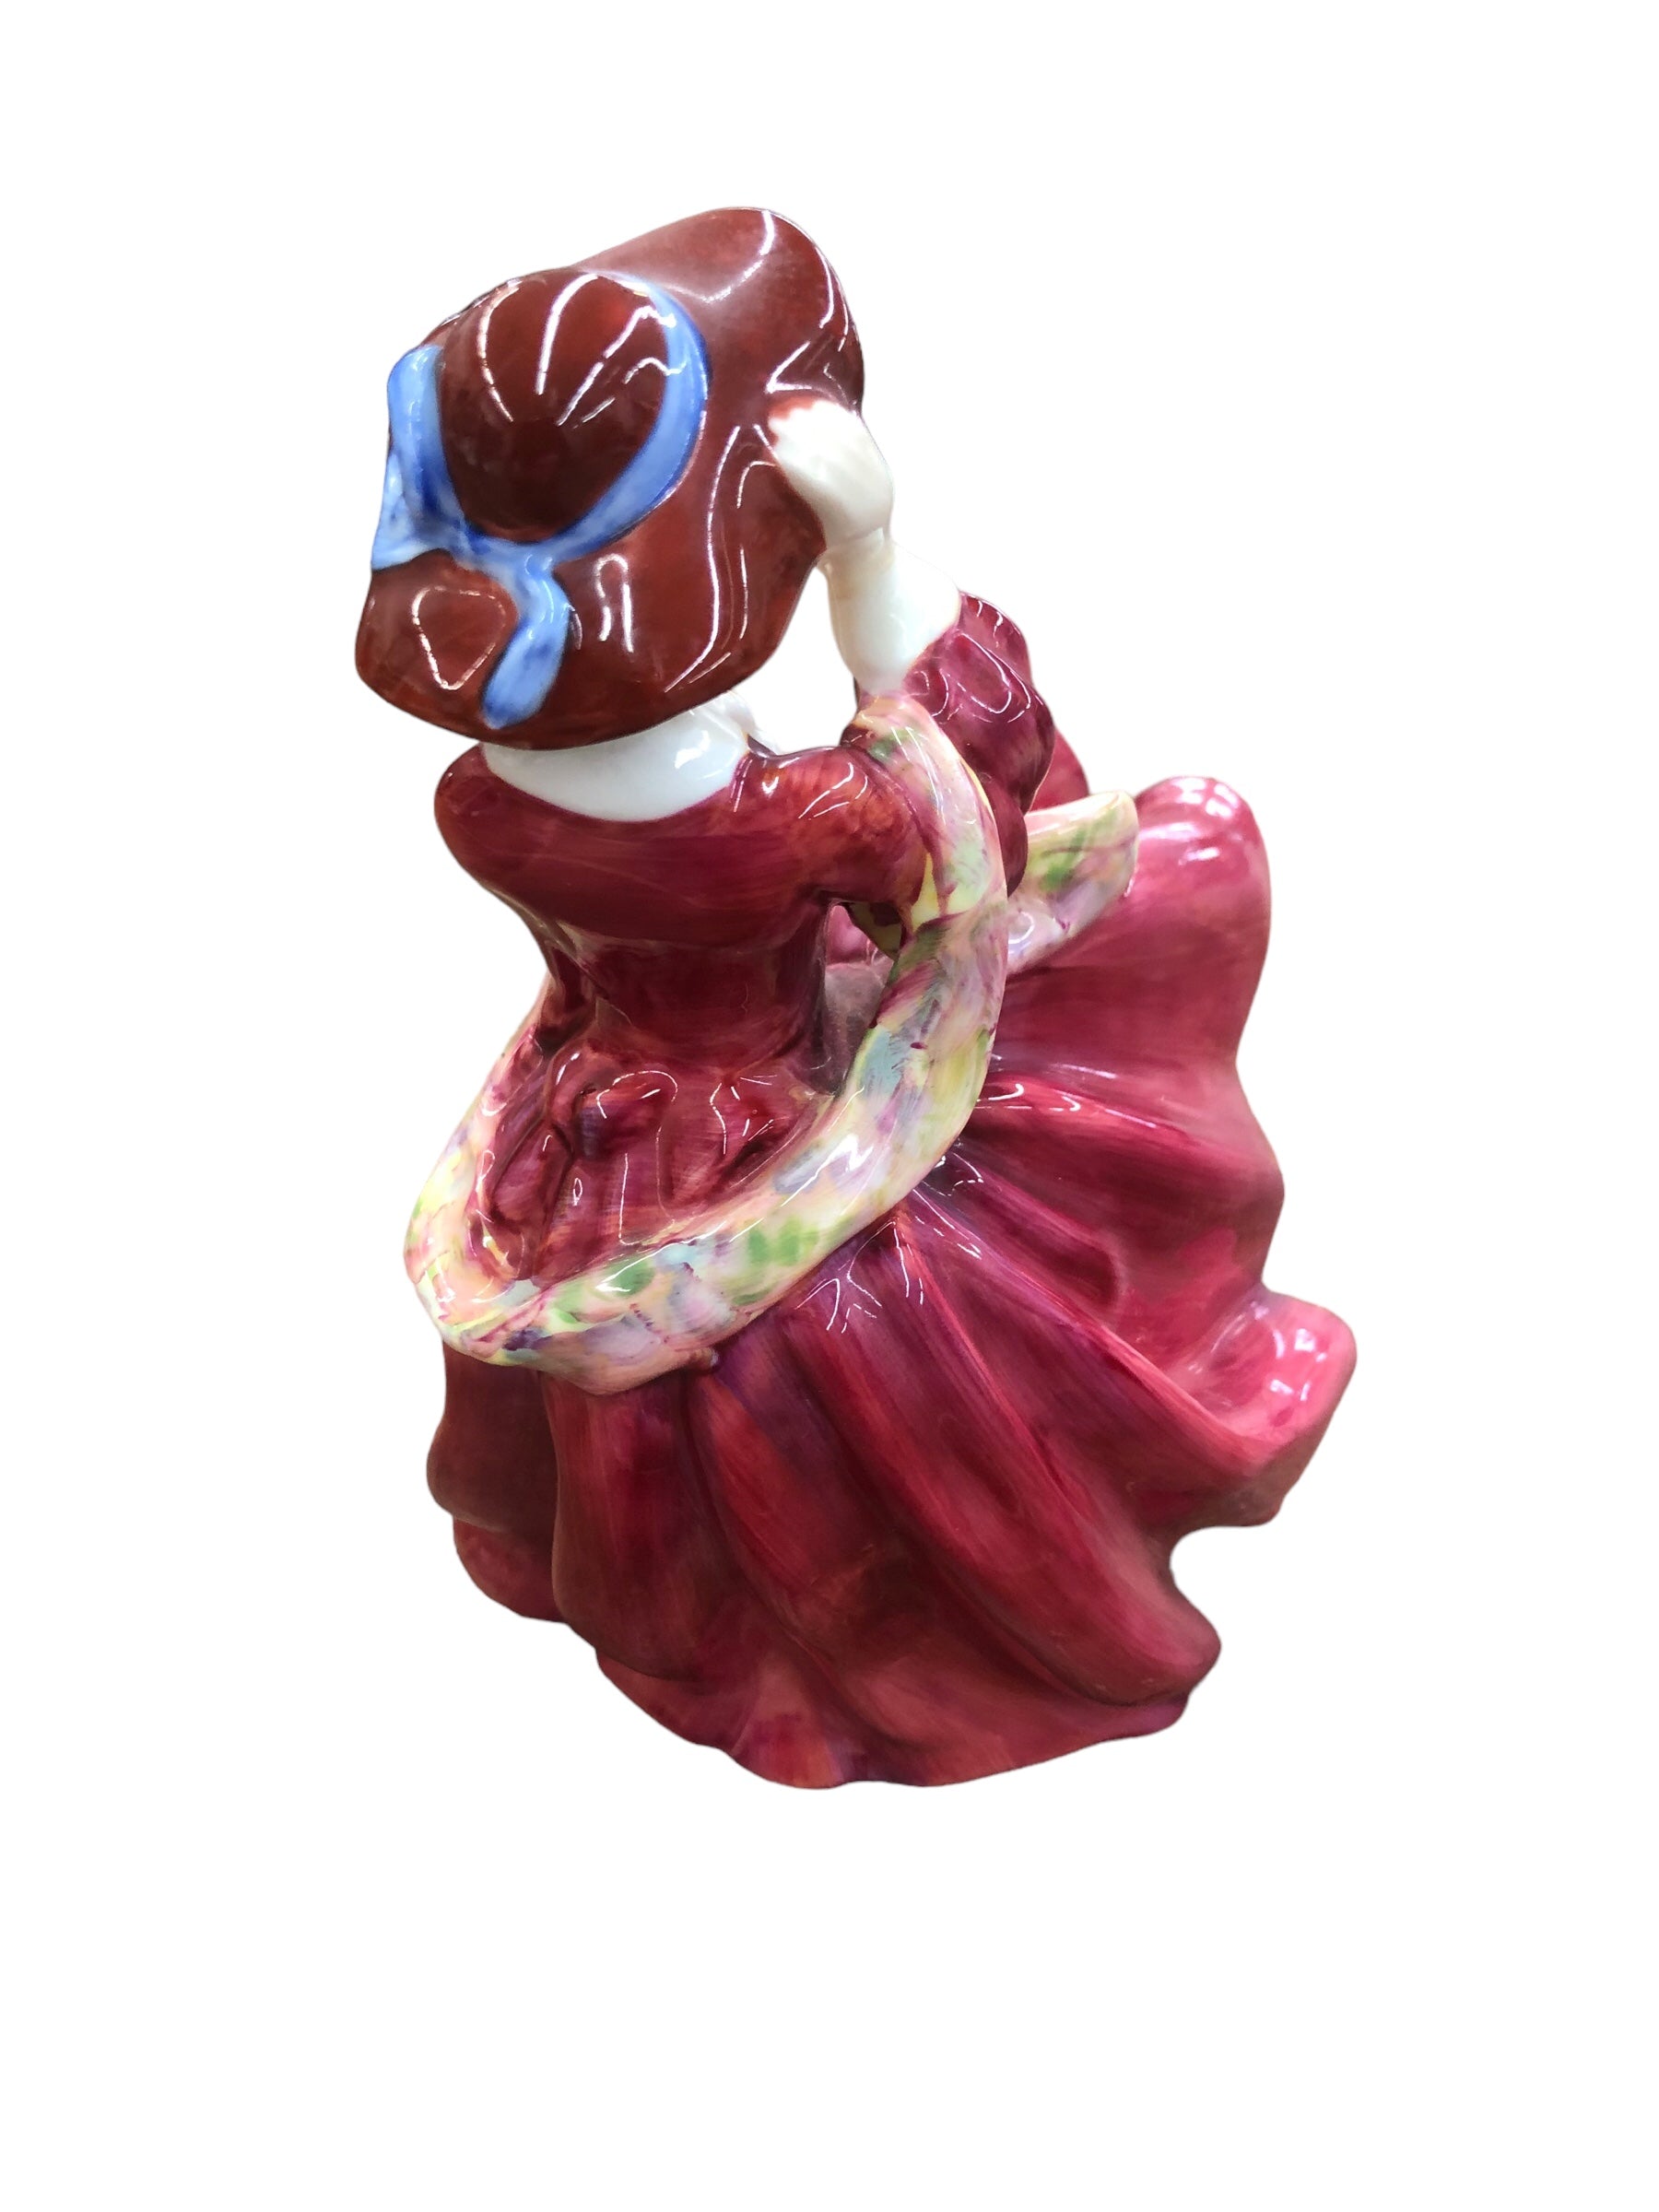 Royal Doulton "Top O the Hill" Figurine